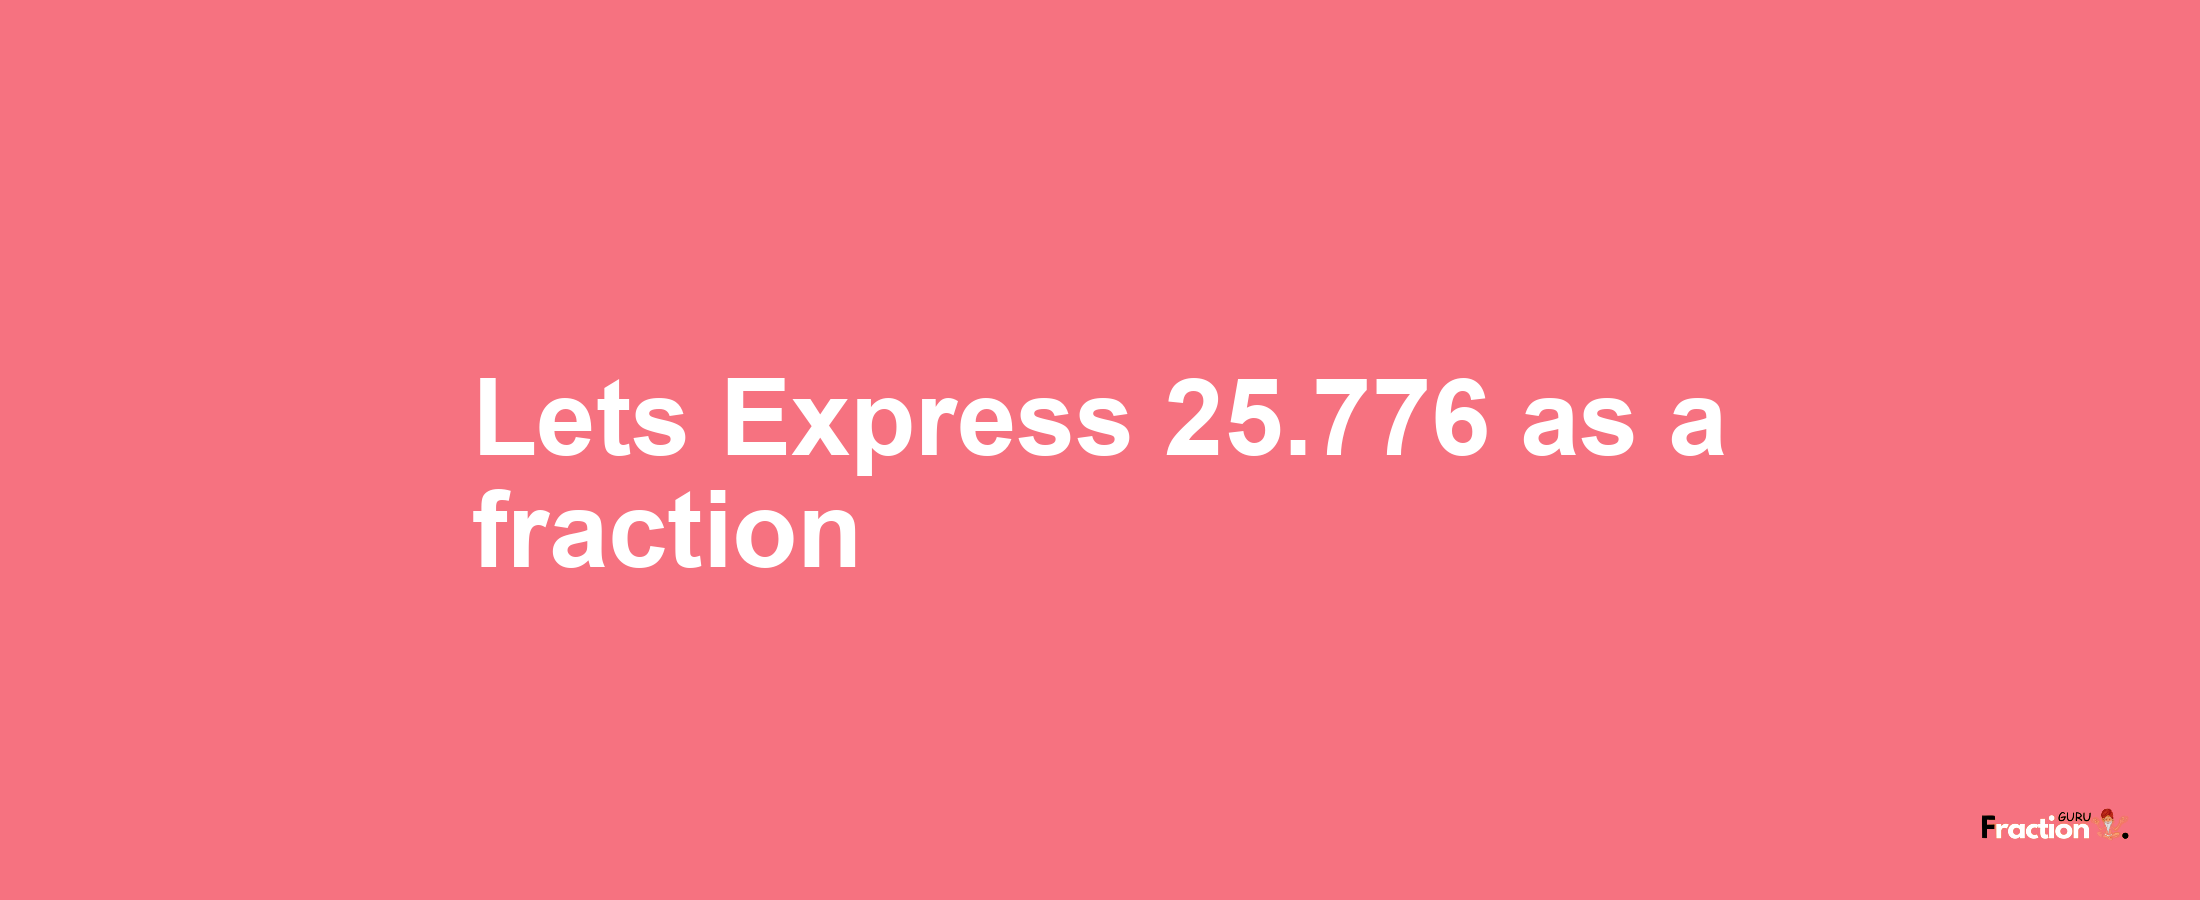 Lets Express 25.776 as afraction